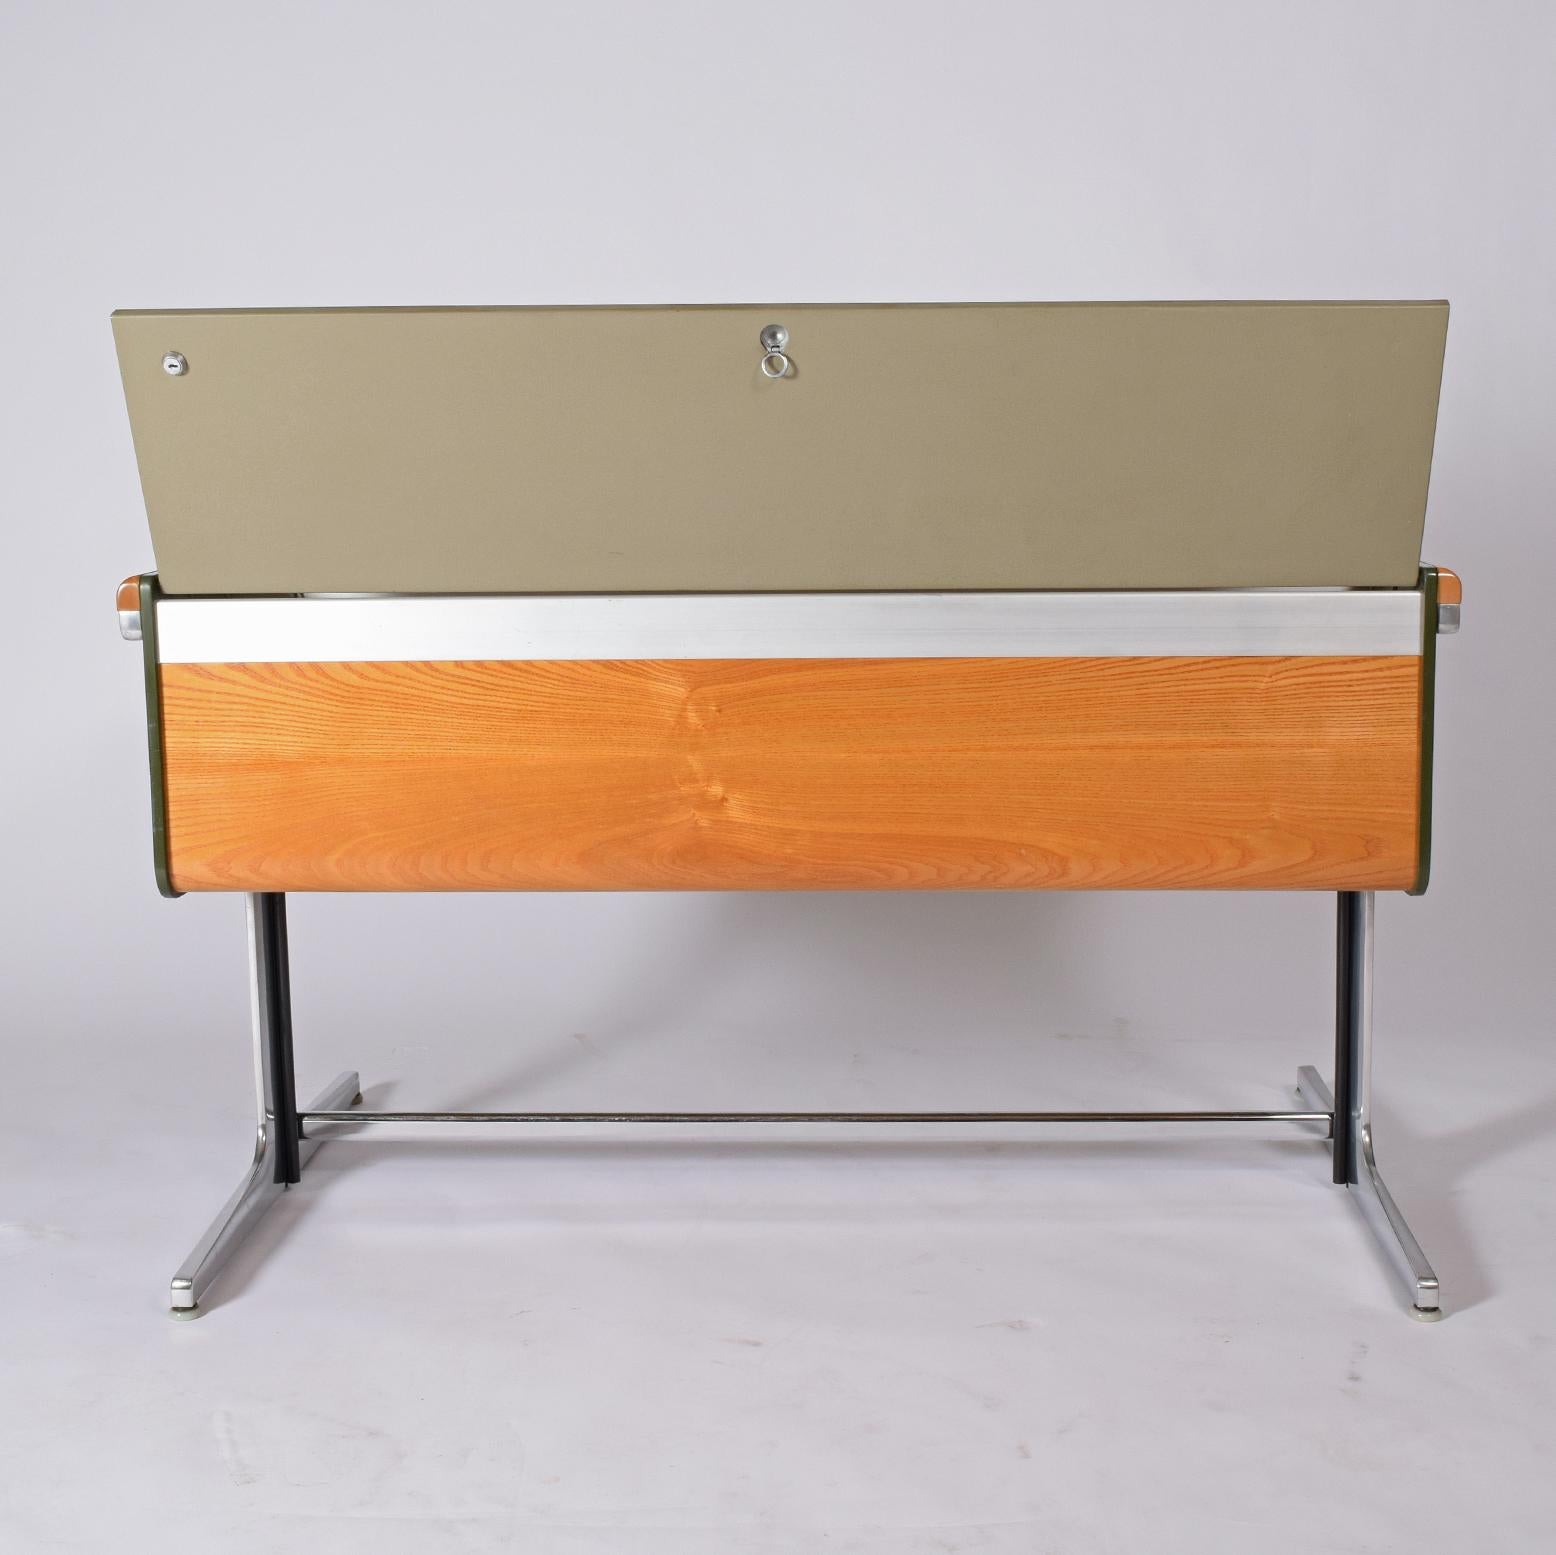 Mid-20th Century George Nelson Auction Office Desk #64902 for Herman Miller